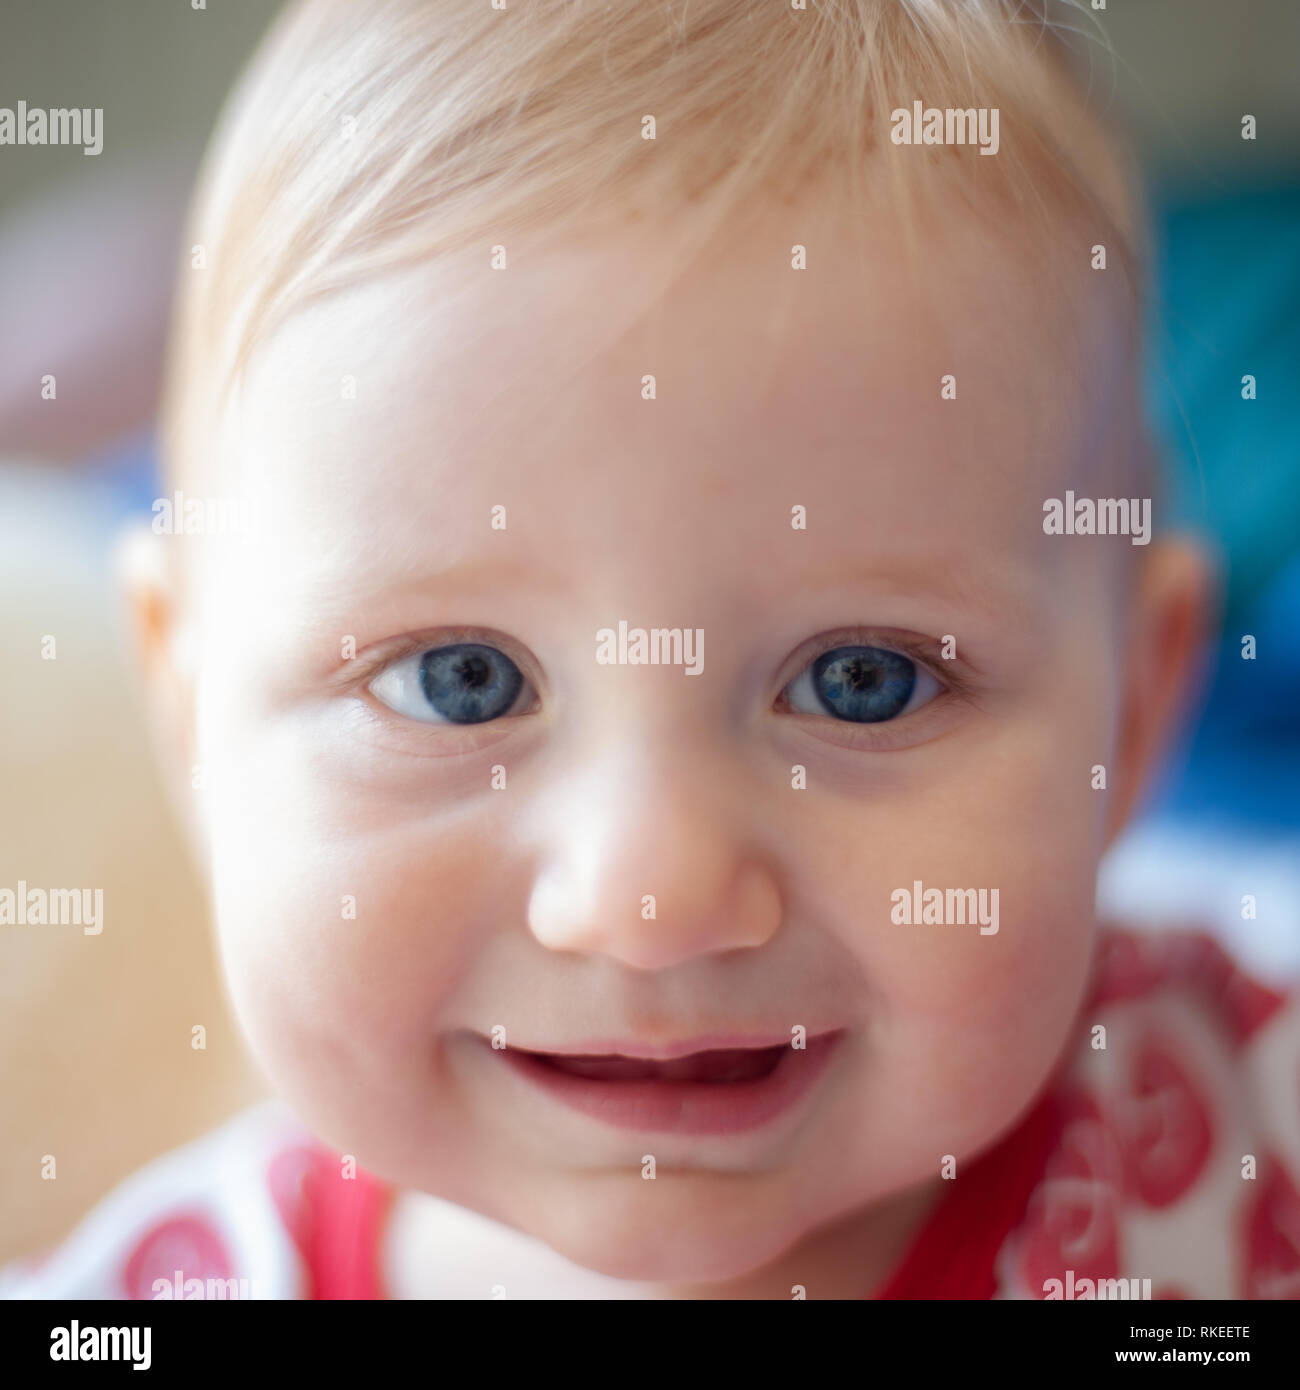 Portrait of happy baby with blue eyes Stock Photo